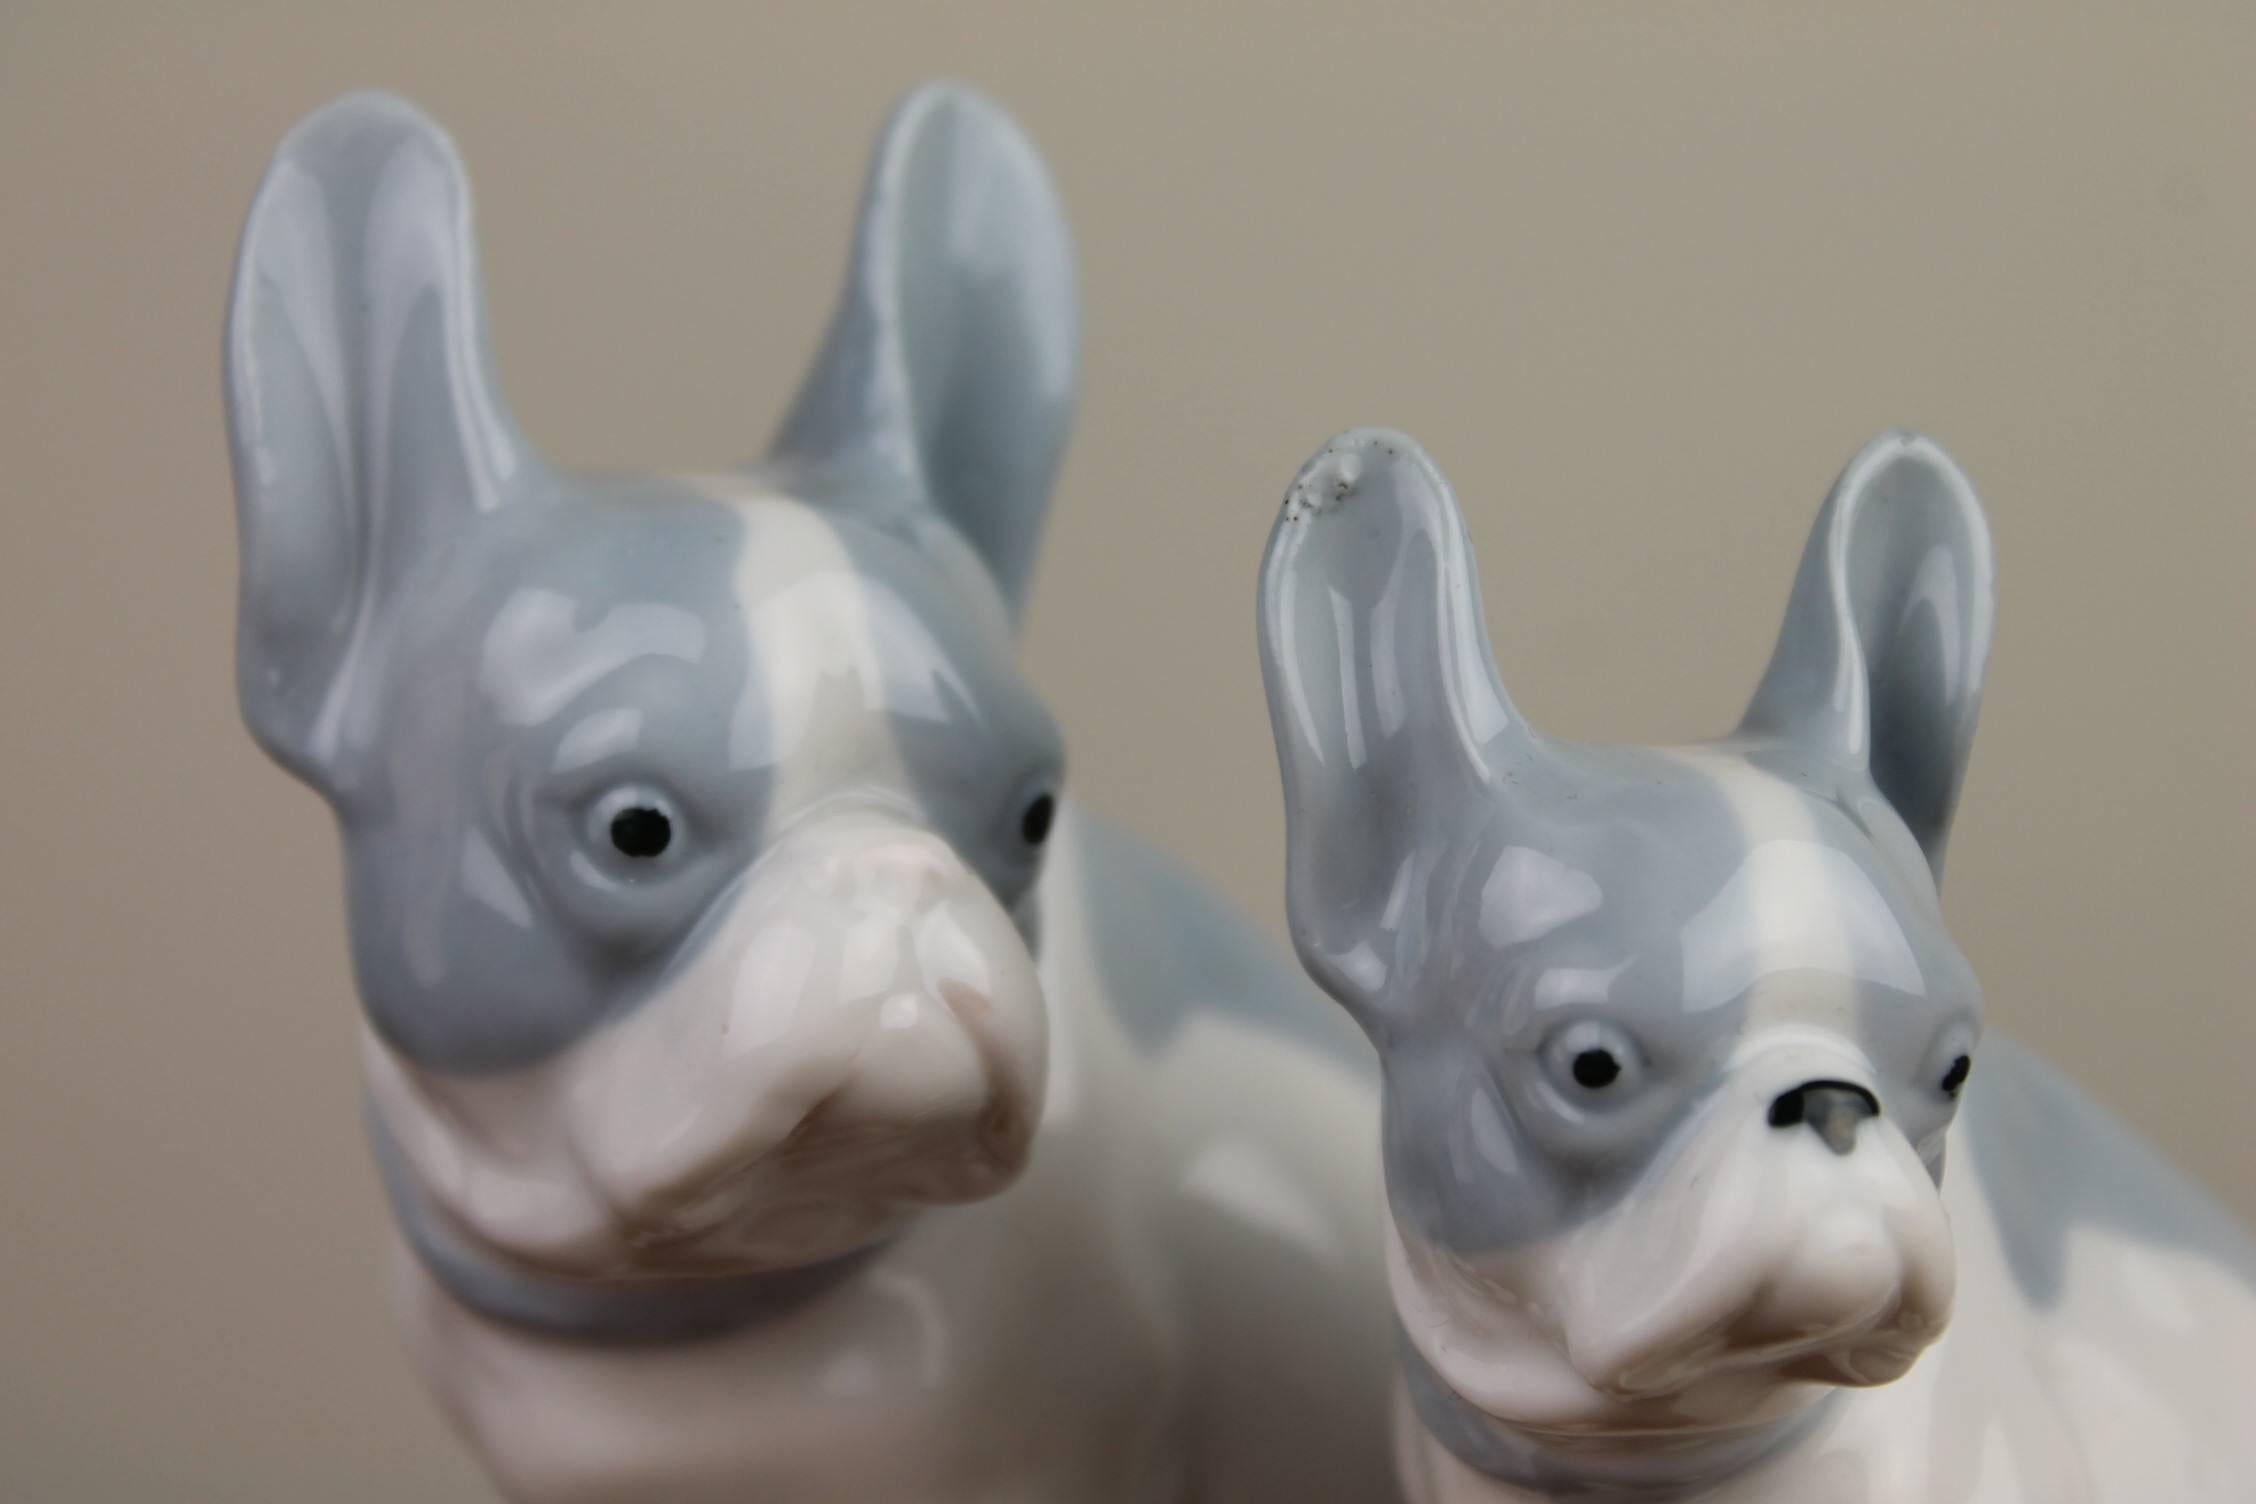 Lovely vintage bullies, bully, bulldogs in very special blue and white coloring.
1950s German Porcelain French Bulldog Figures.
Both numbered - Designer unknown.
They have small imperfections in the porcelain.
Priced as a couple and only for